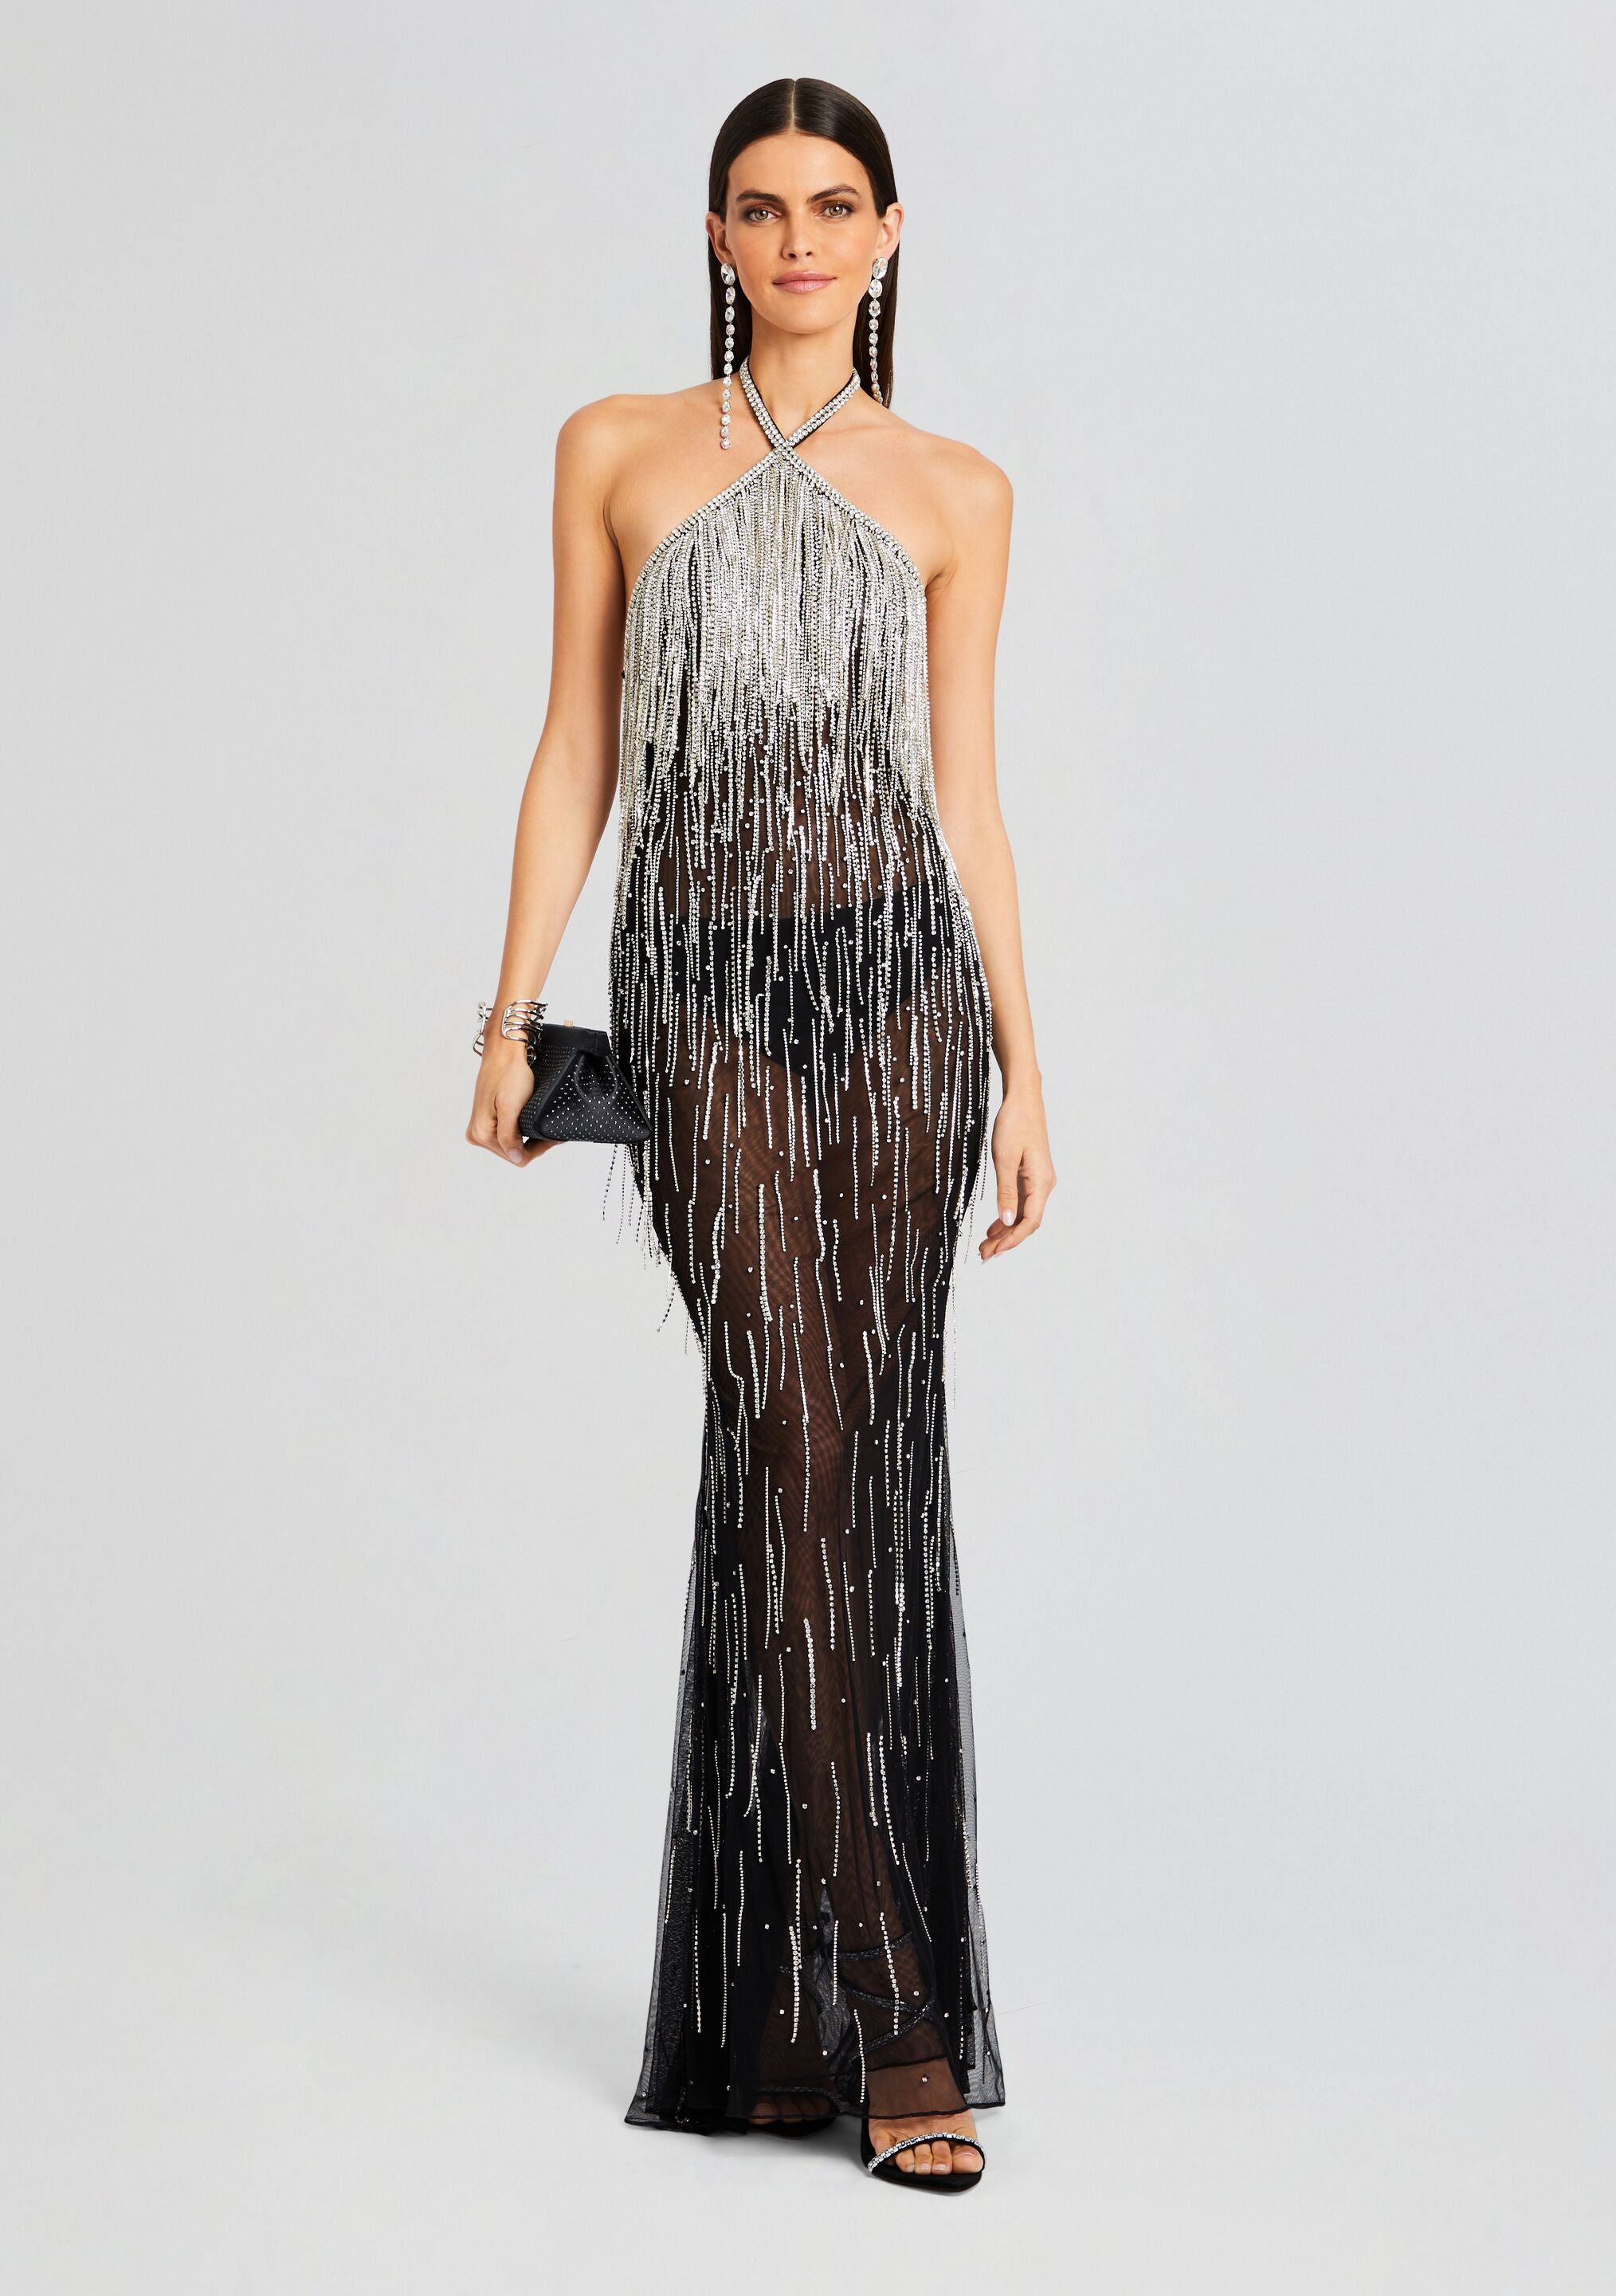 Fringe Tassels Gown by Chisel by Meghna Ramrakhiya at Aza Fashions | Ladies  gown, Bodycon gown, Aza fashion